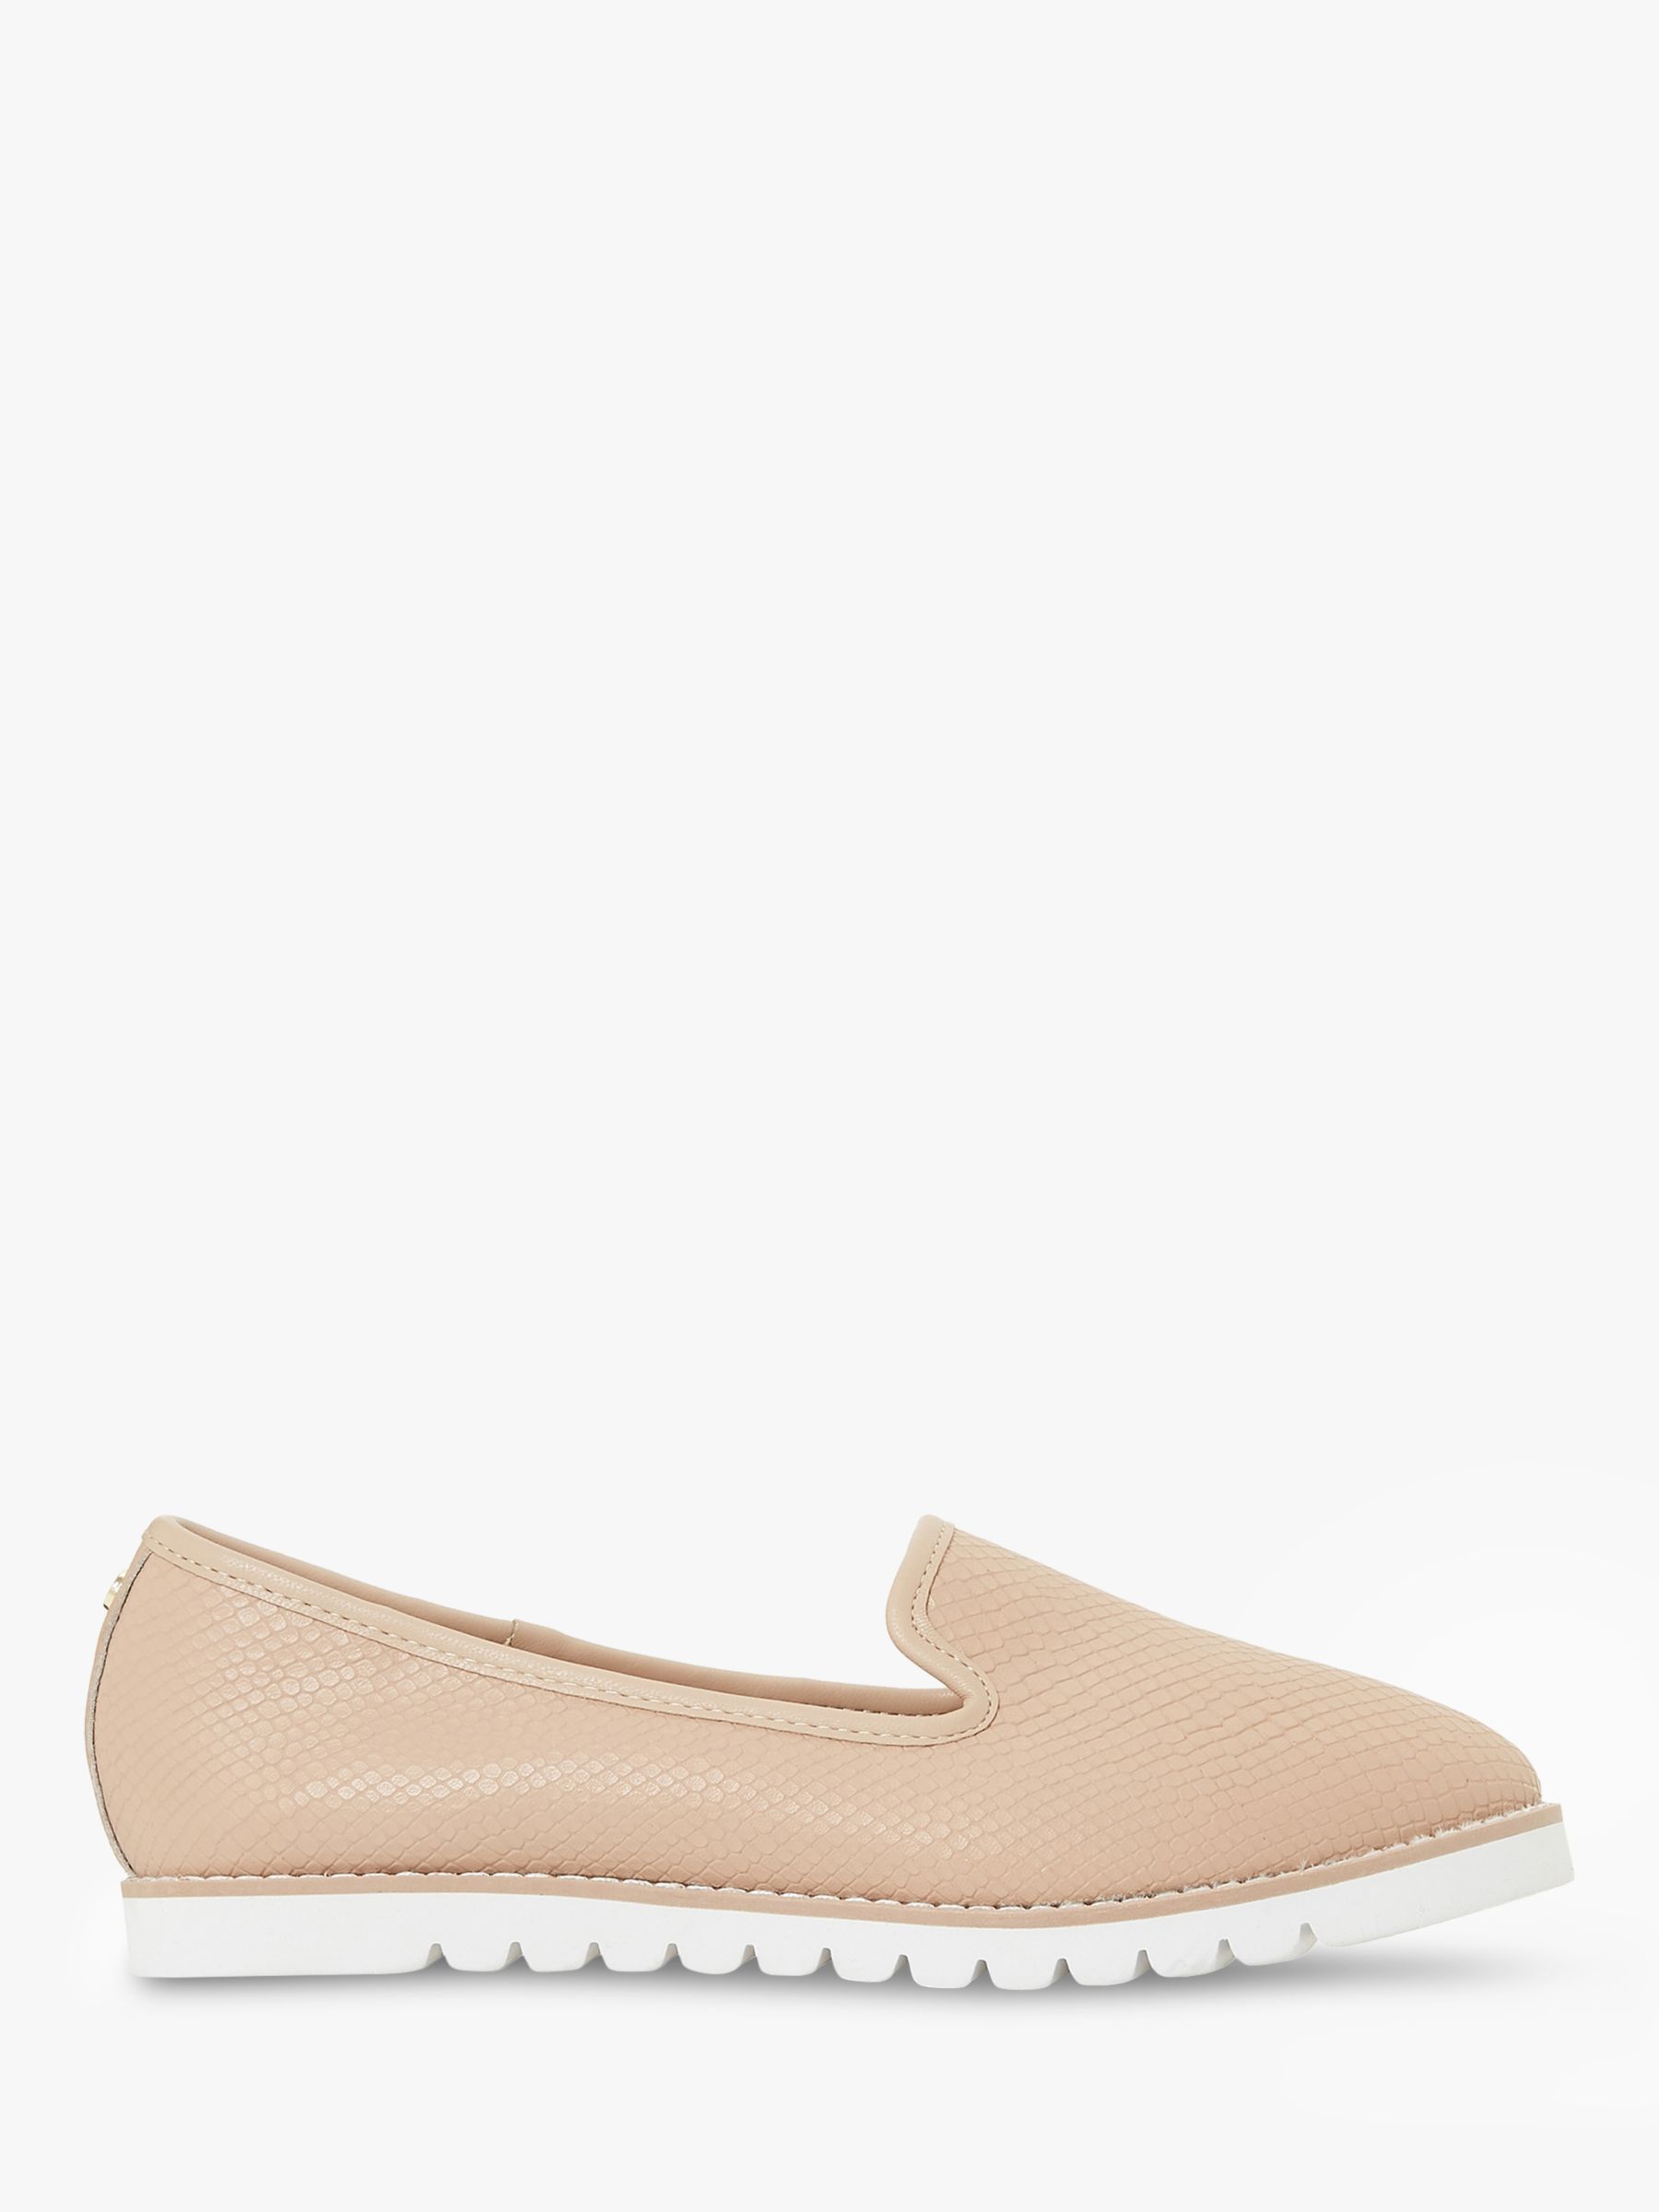 Dune Galleon Ridged Leather Loafers, Cappuccino